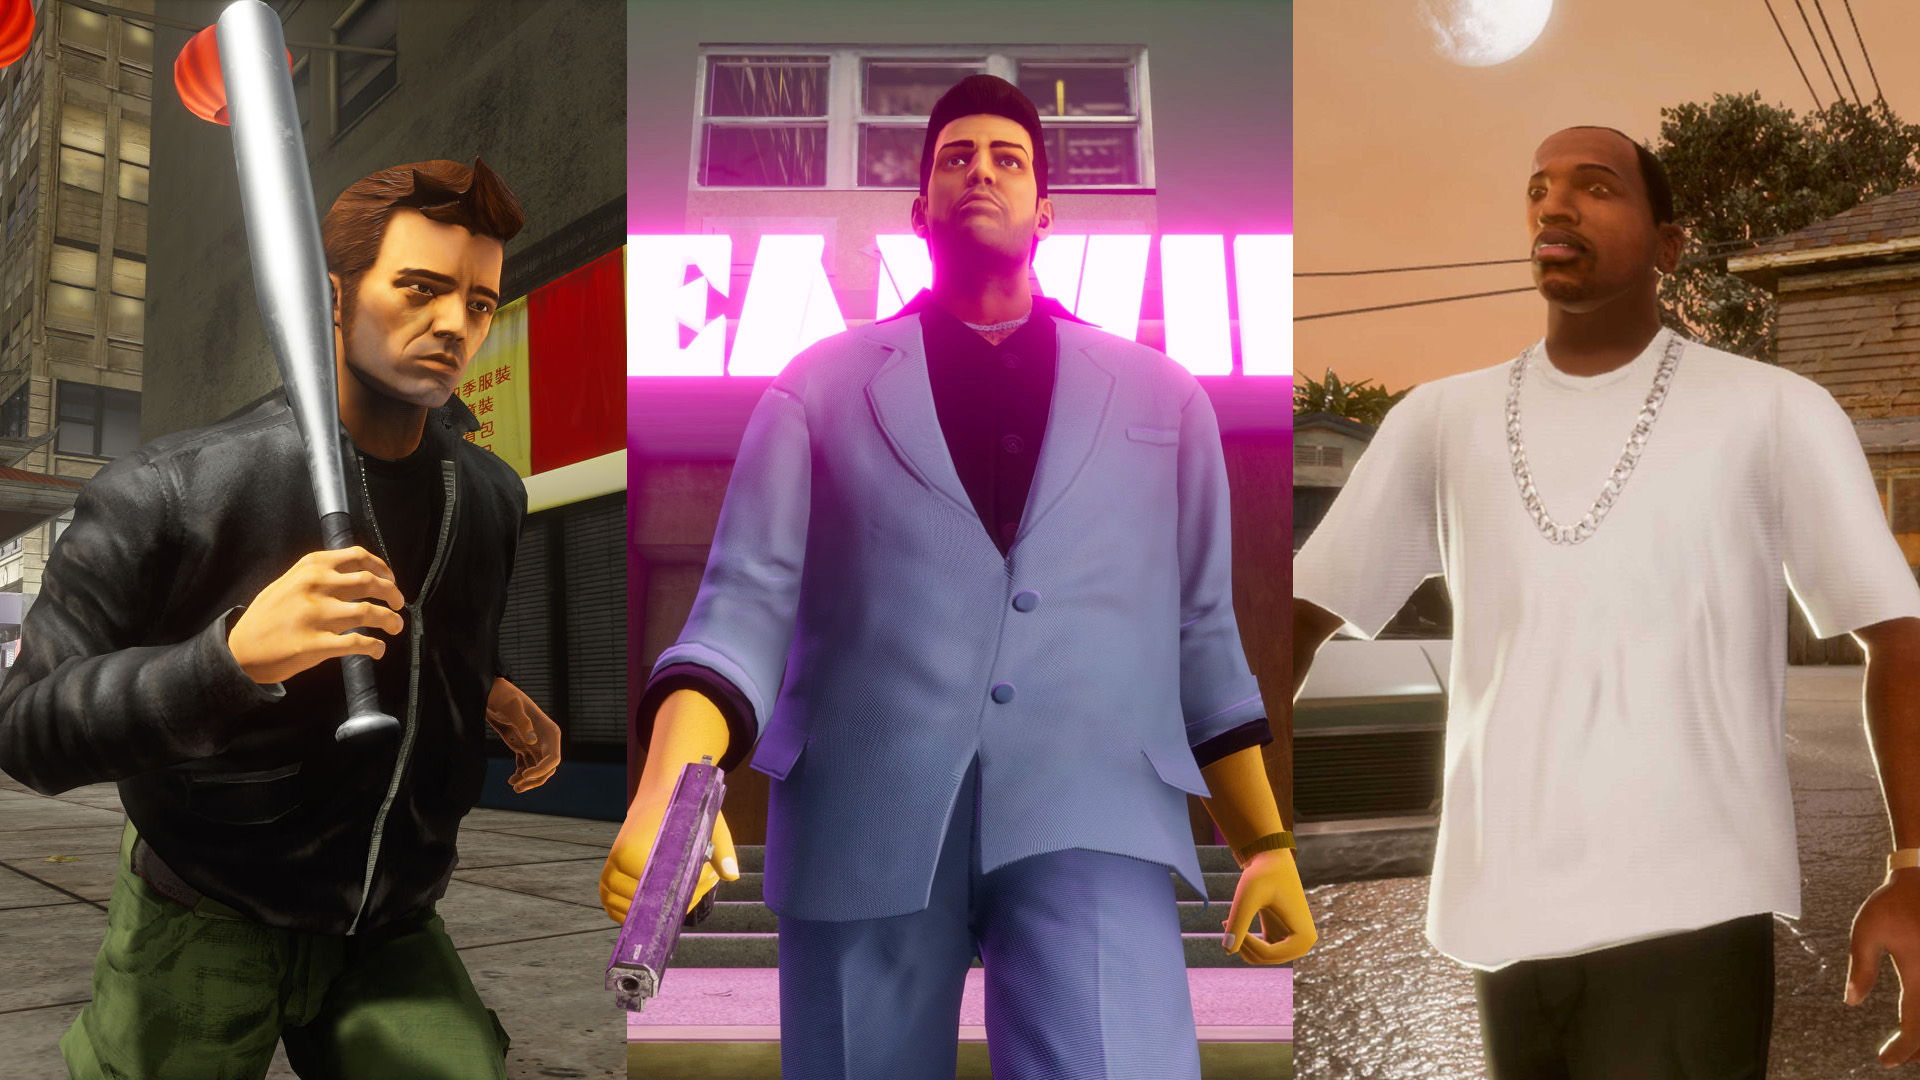 Review, Grand Theft Auto Vice City - Definitive Edition